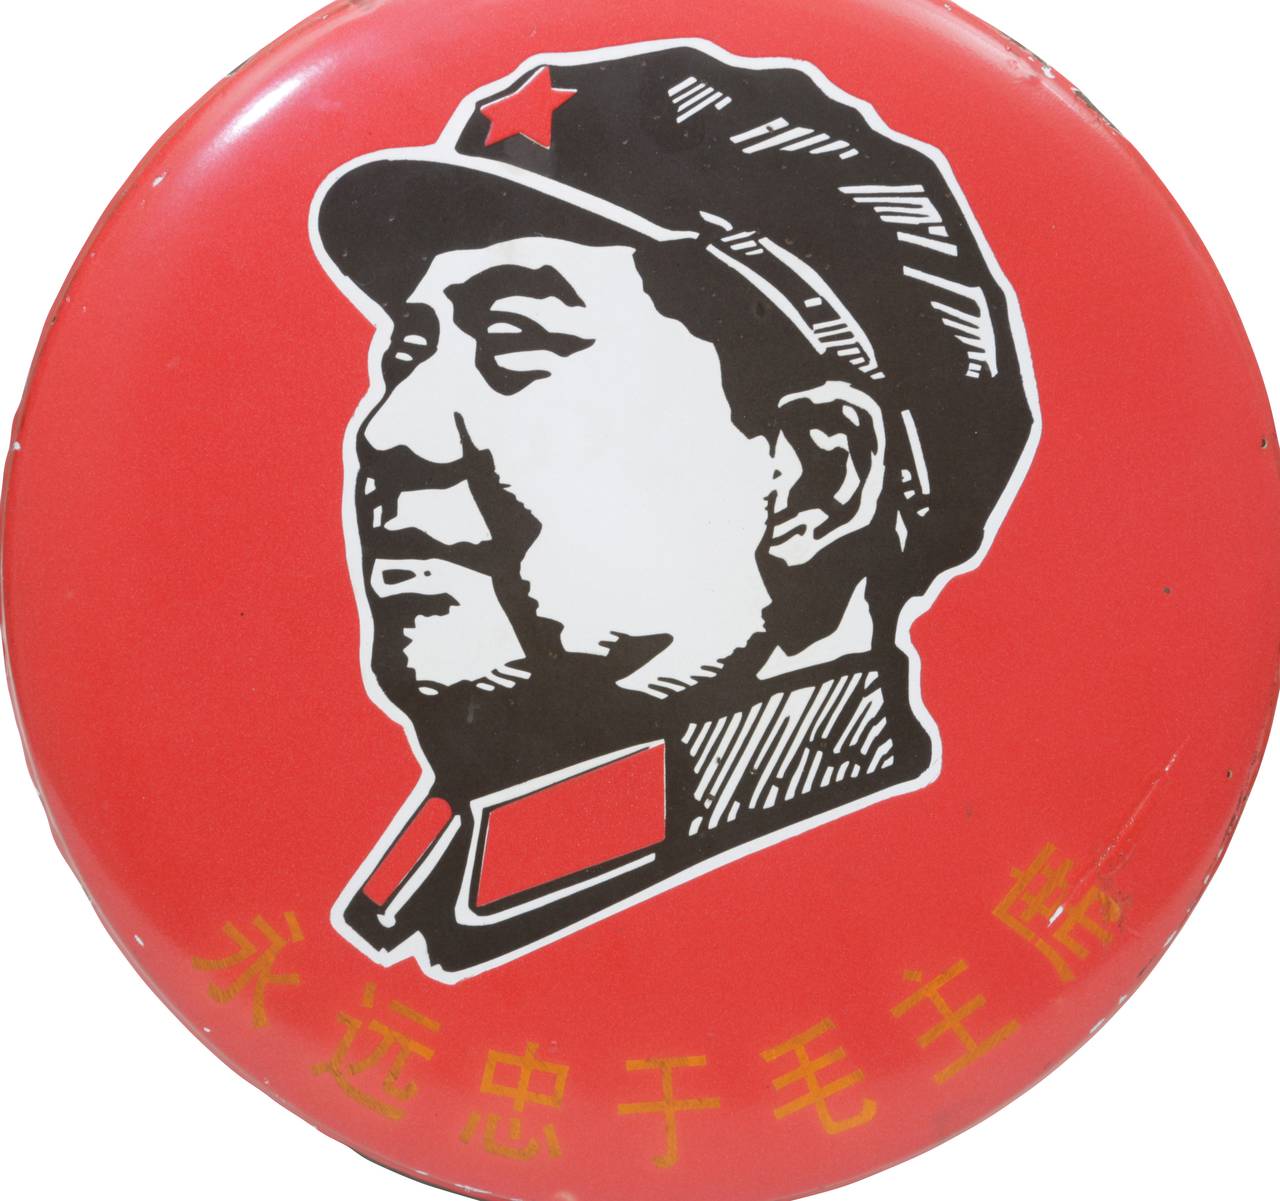 Two enamel and painted metal wall hanging signs depicting Mao Zedong used in 1960s China. Dated and lettered on reverse side of one sign. Great and vibrant wall hangings.